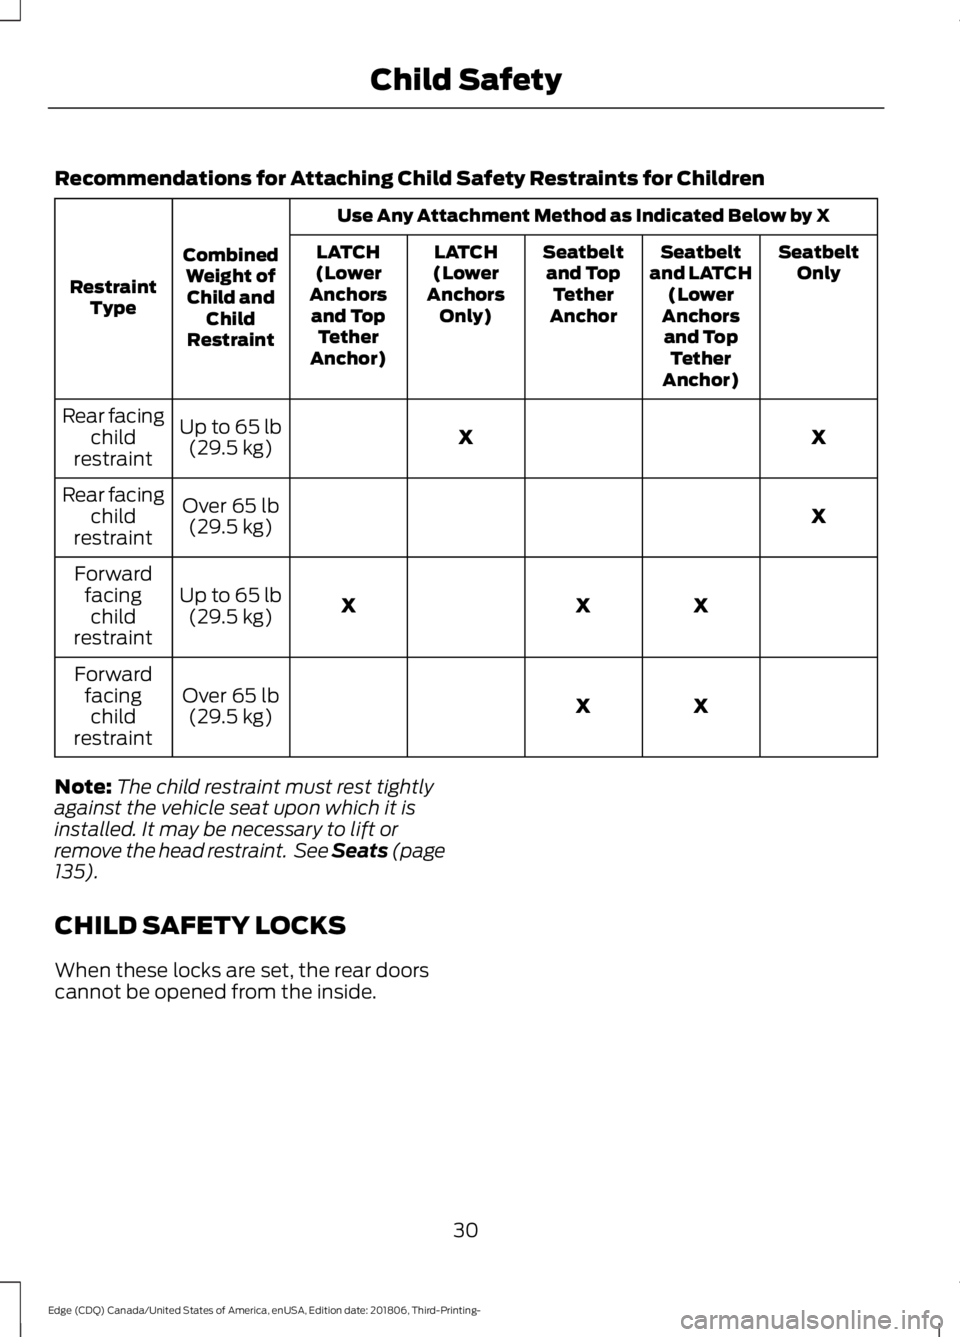 FORD EDGE 2019  Owners Manual Recommendations for Attaching Child Safety Restraints for Children
Use Any Attachment Method as Indicated Below by X
Combined Weight ofChild and Child
Restraint
Restraint
Type Seatbelt
Only
Seatbelt
a